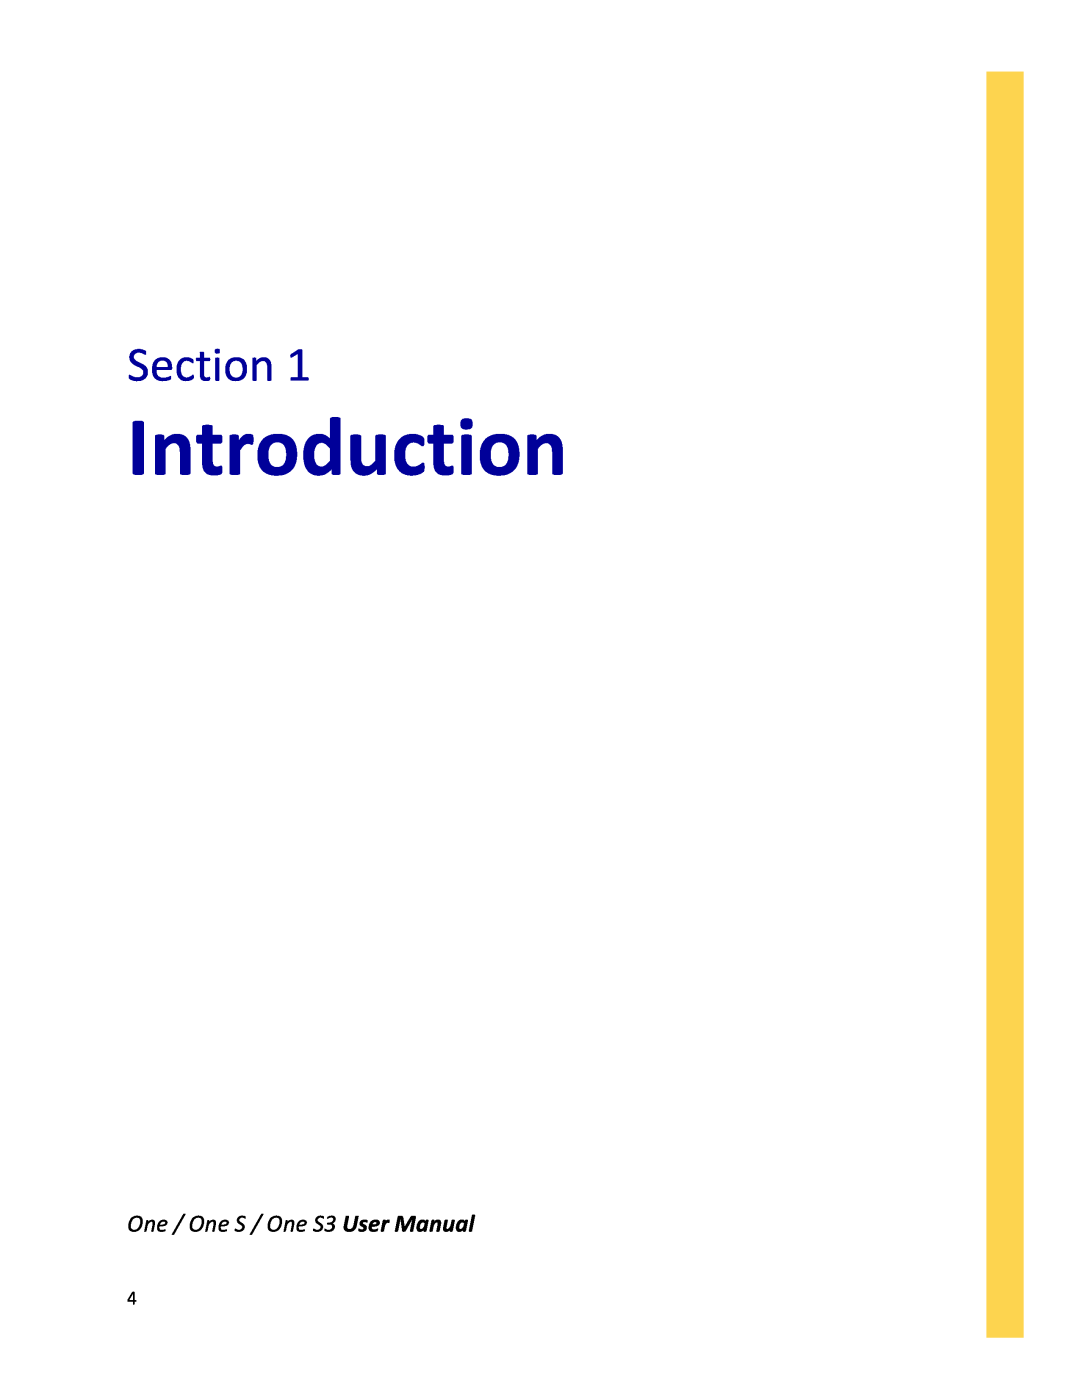 Antec ONE S3 user manual Introduction, Section, One / One S / One S3 User Manual 